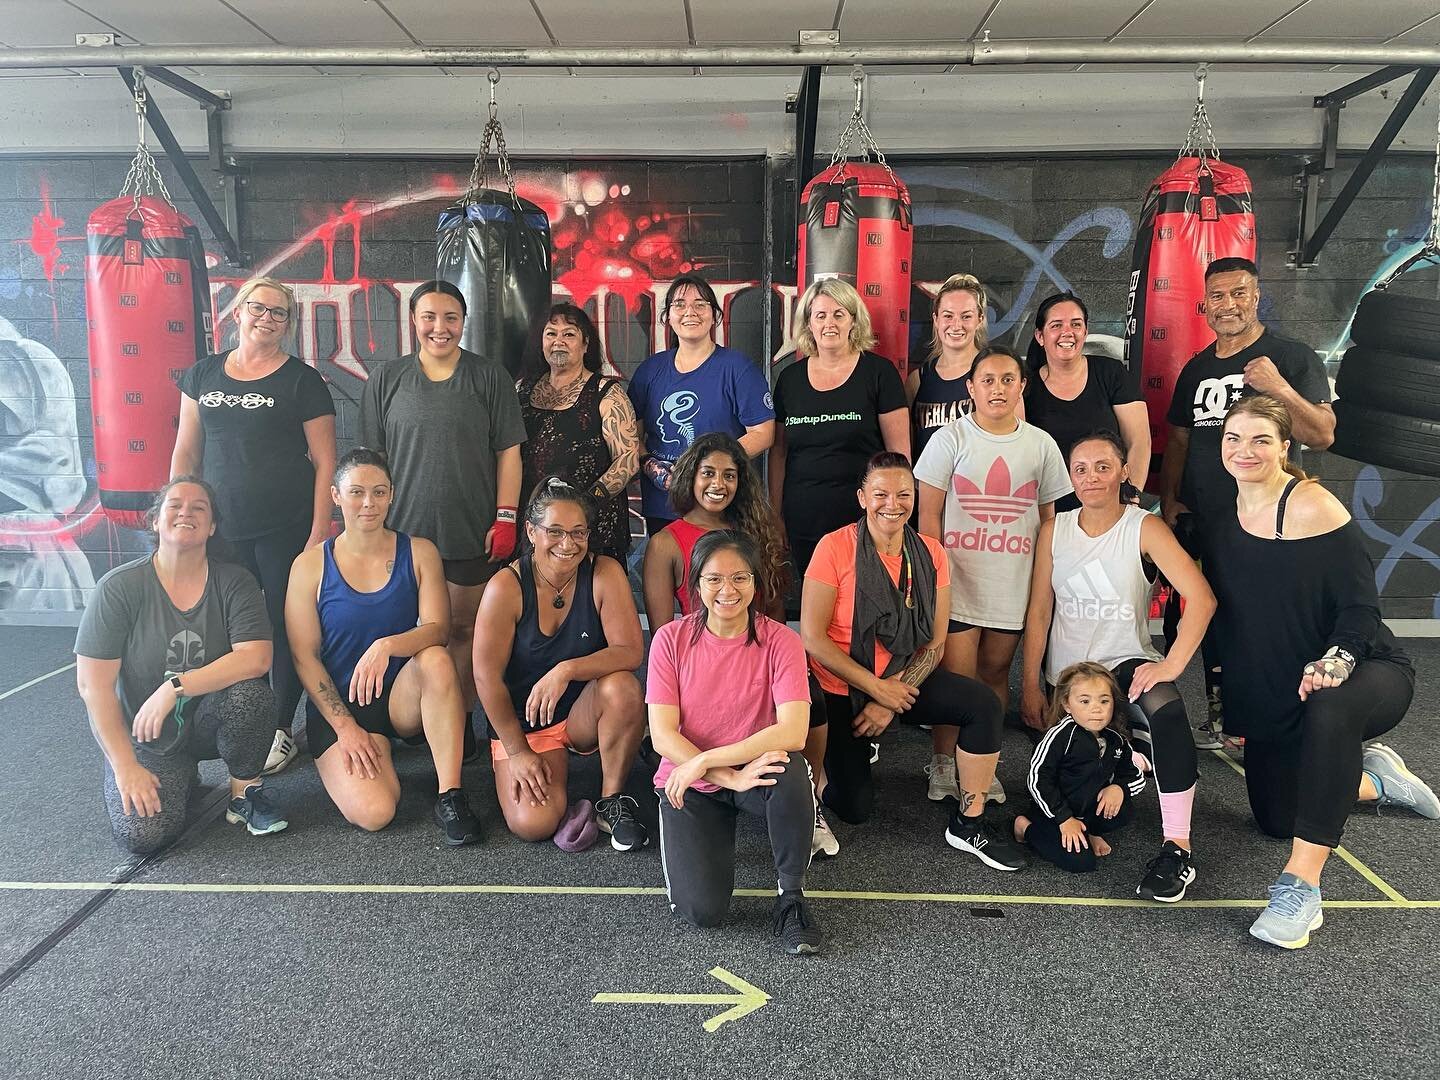 Very proud of these ladies for their mahi and dedication to better themselves every session here at ŌBC! Keep up the great work! 🥊💃

#womenboxing #boxing #femaleboxing #femaleboxer #dunedinnz